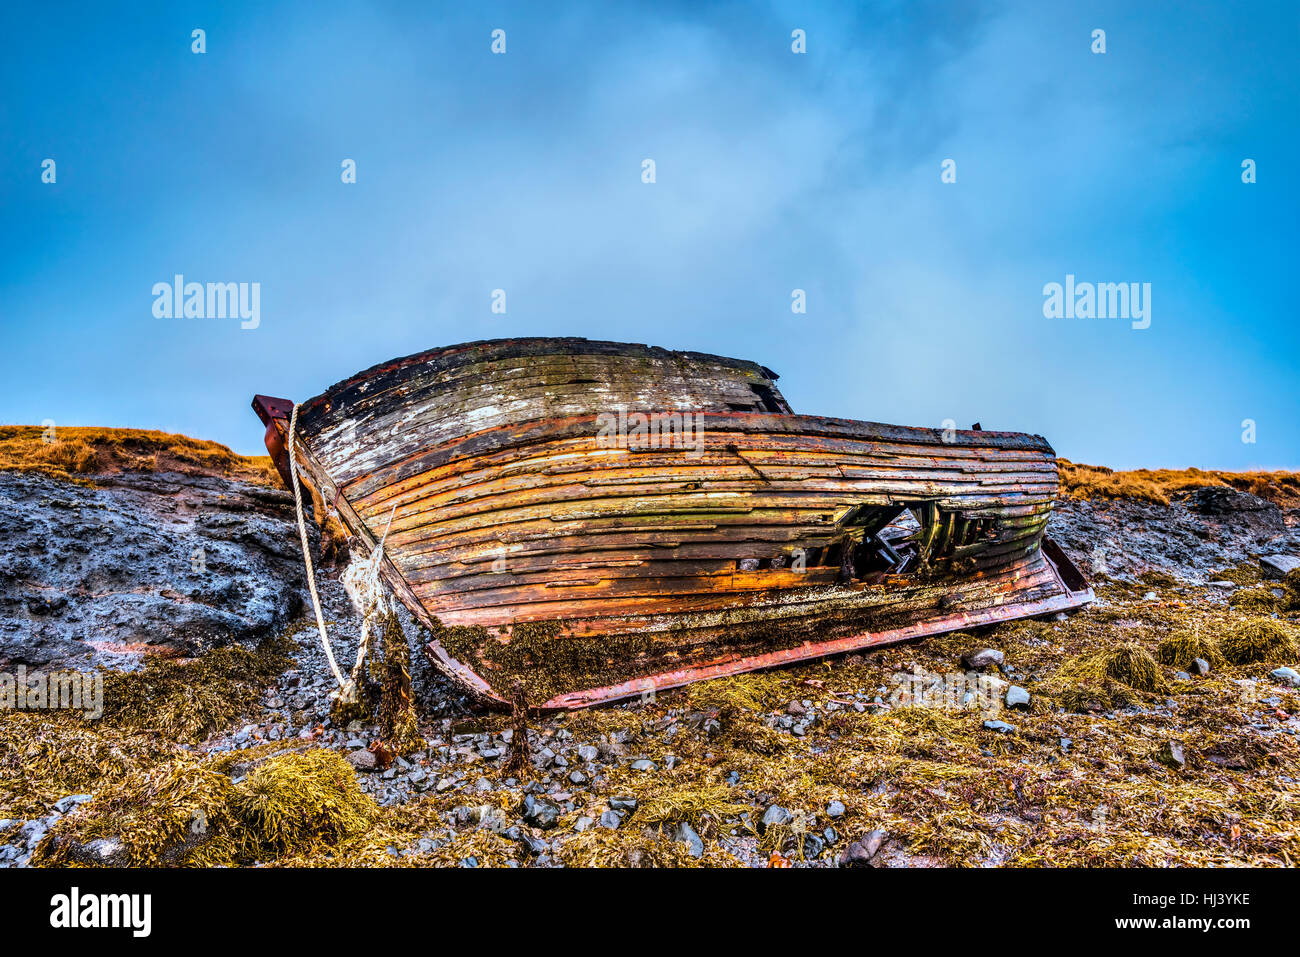 An old abandoned fishing vessel from the early 1900's rests on a remote beach as it rots, exposing the ship's wooden ribs and hull infrastructure. Stock Photo